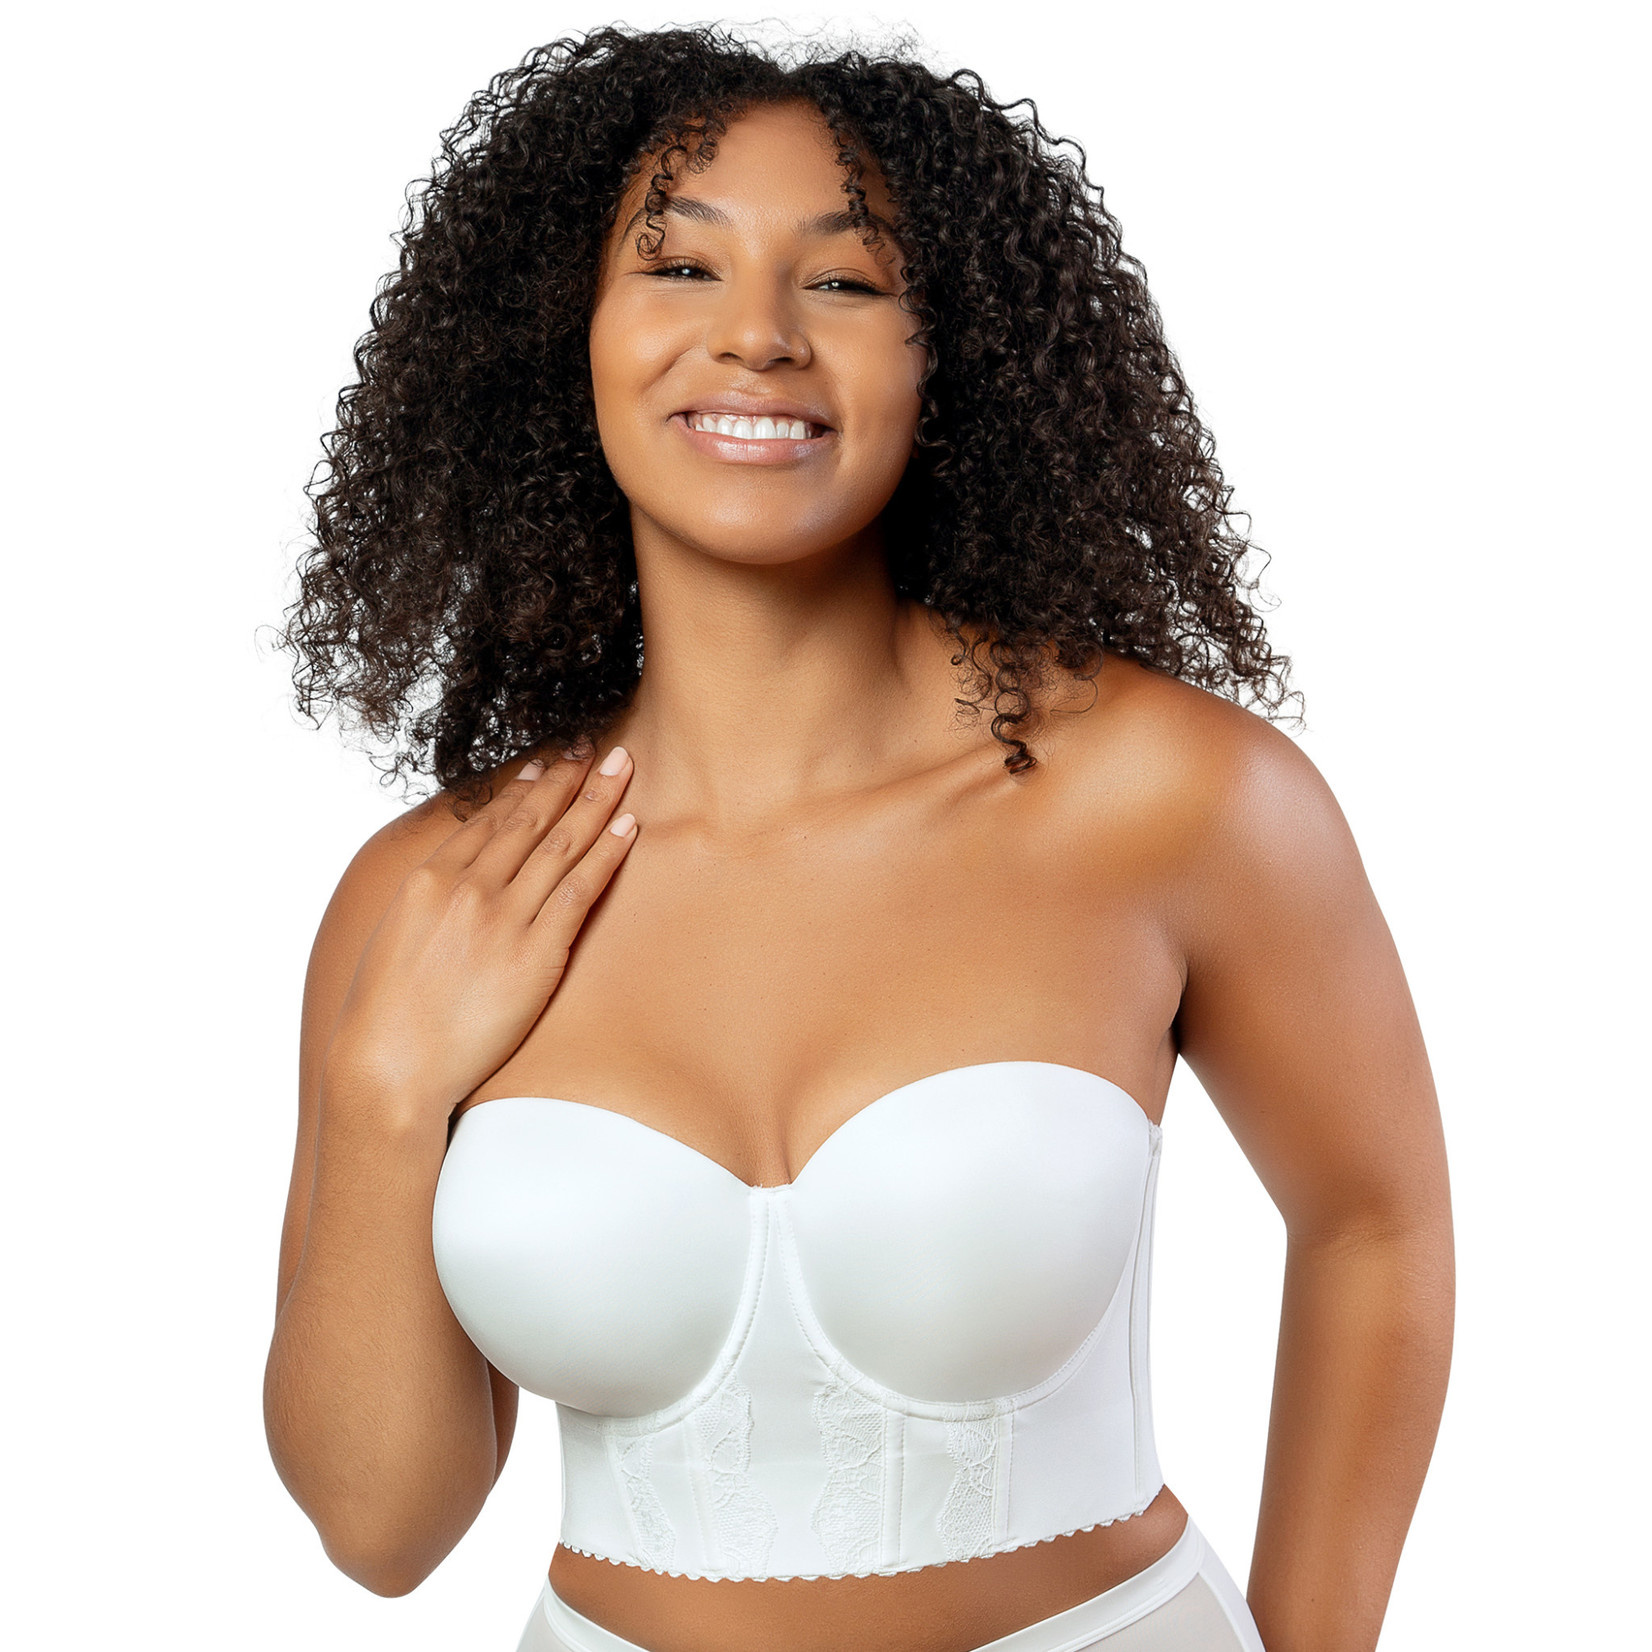 How to Find the Best Strapless Bra for All Figures - Bellatory